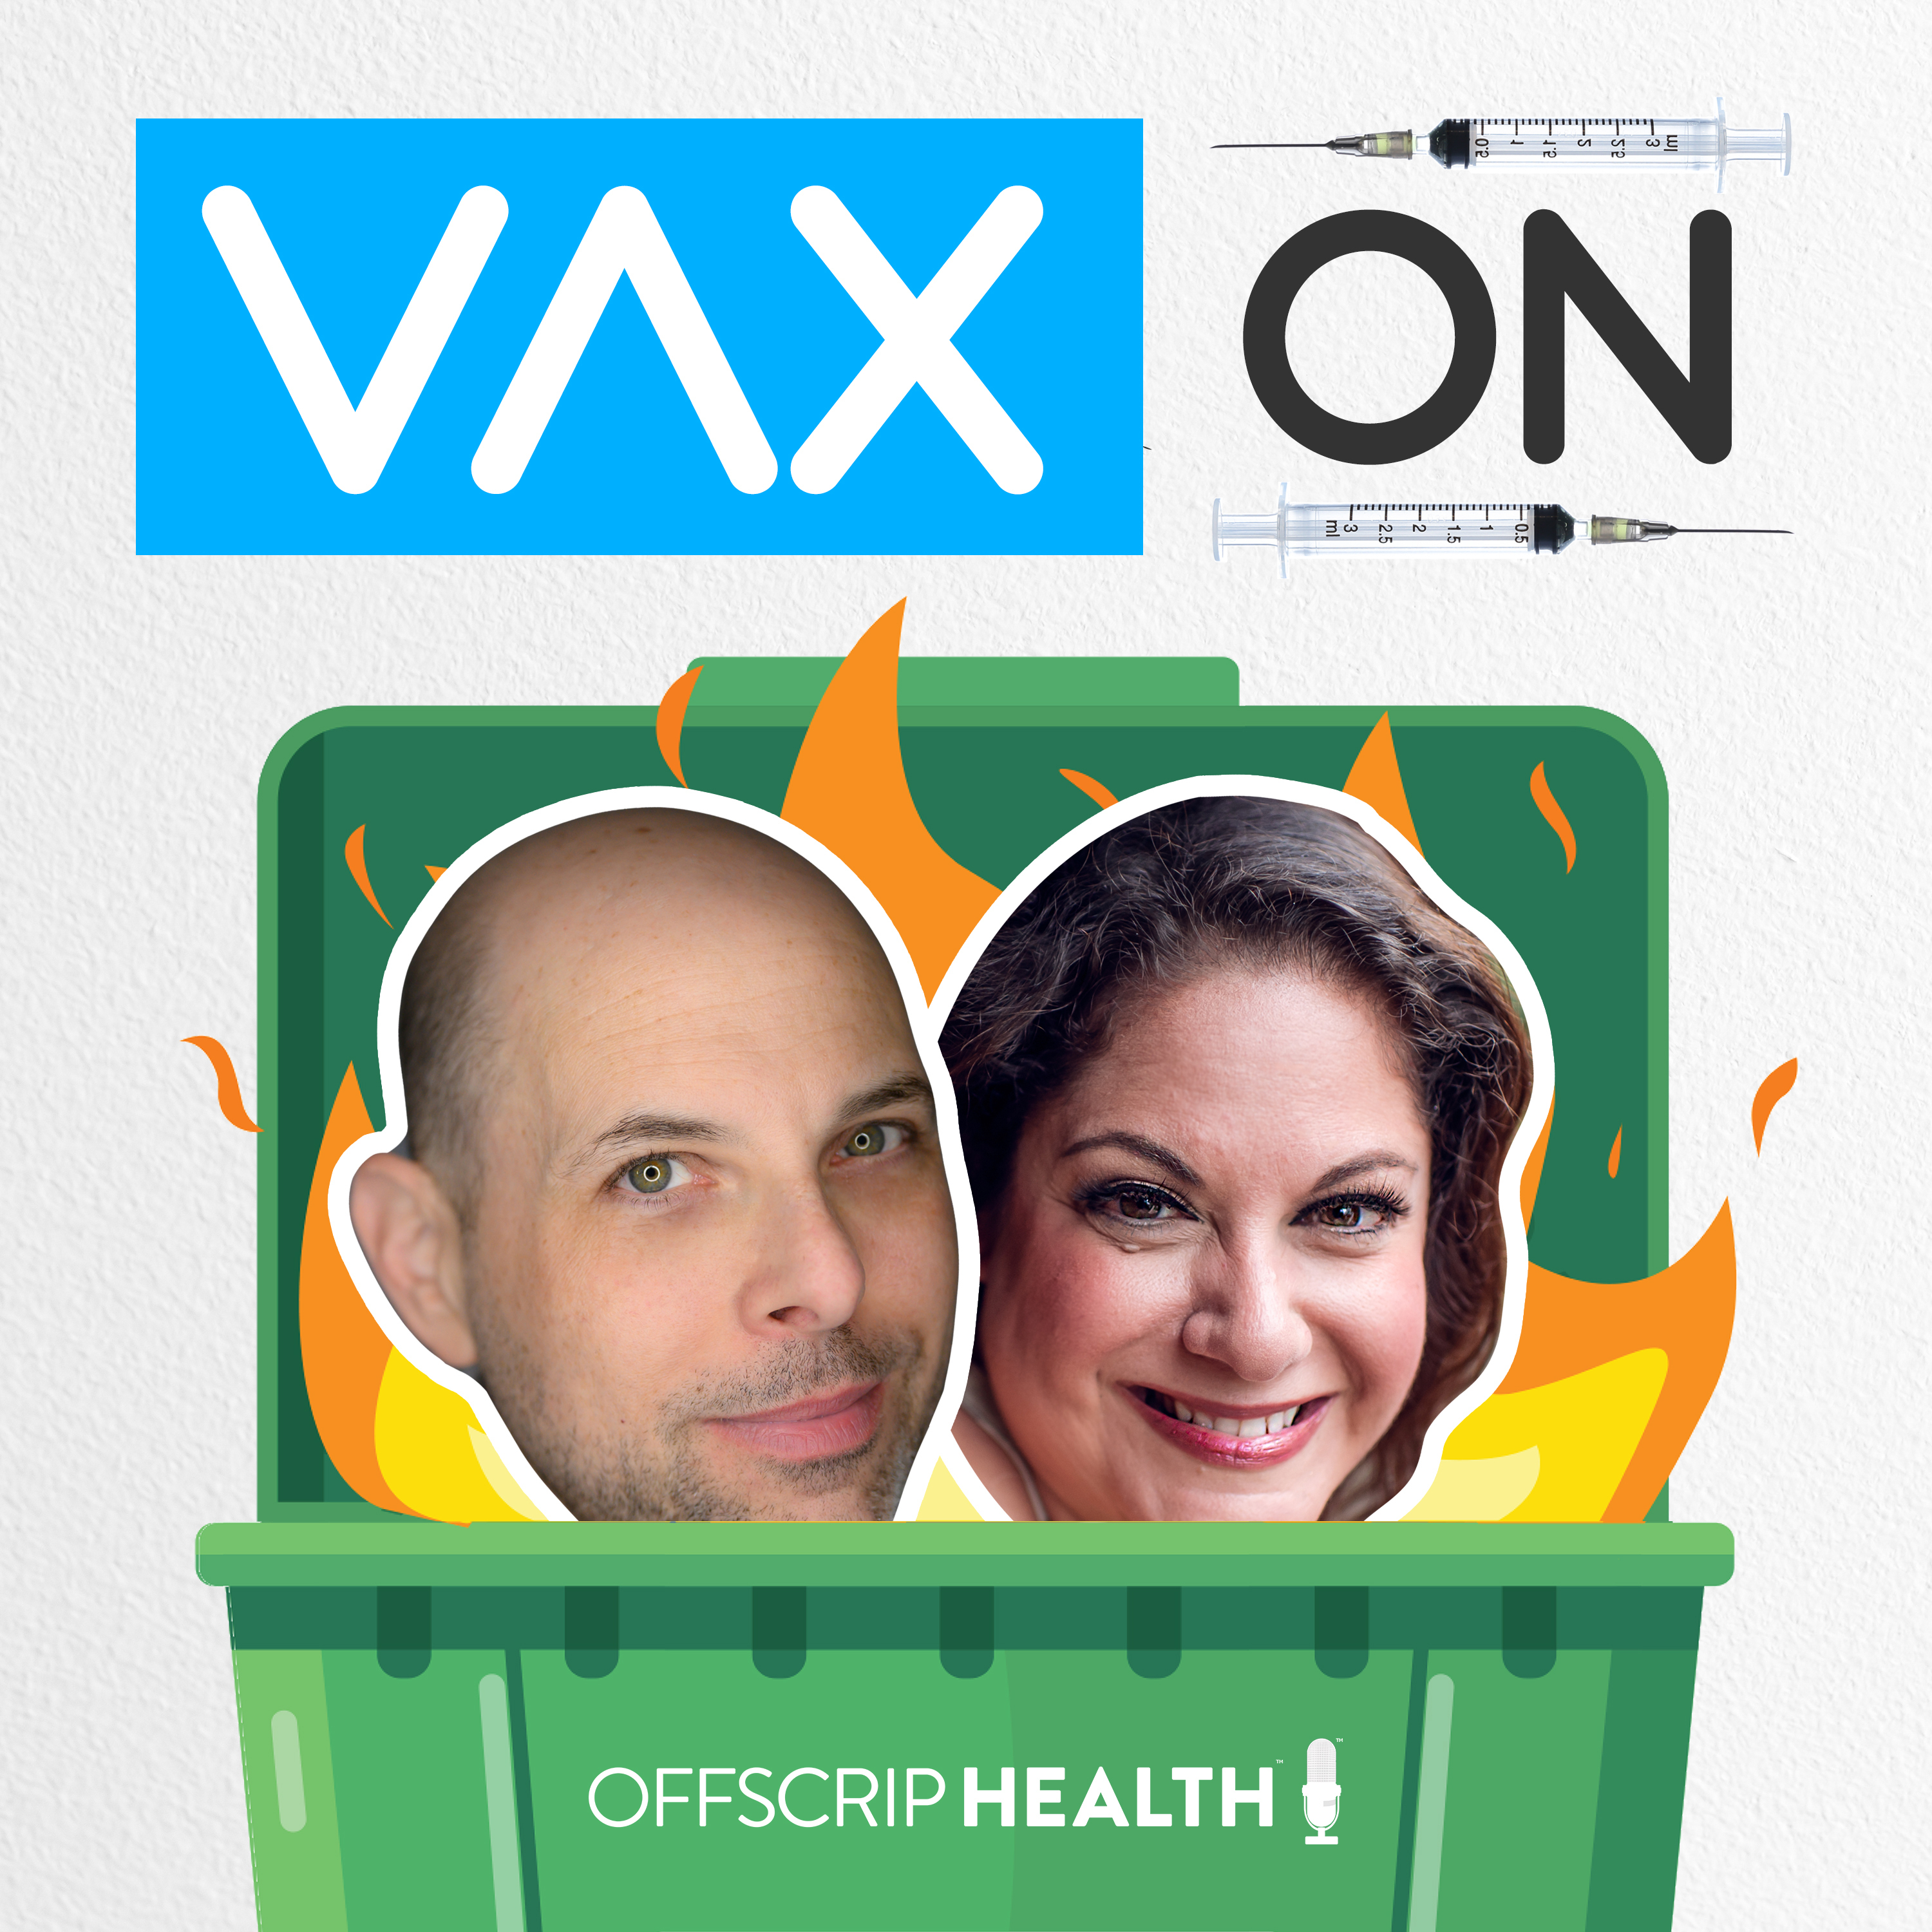 [BEST OF VAX ON] Vax On: New Year, Aerosol Arguments, and Testing Shortages